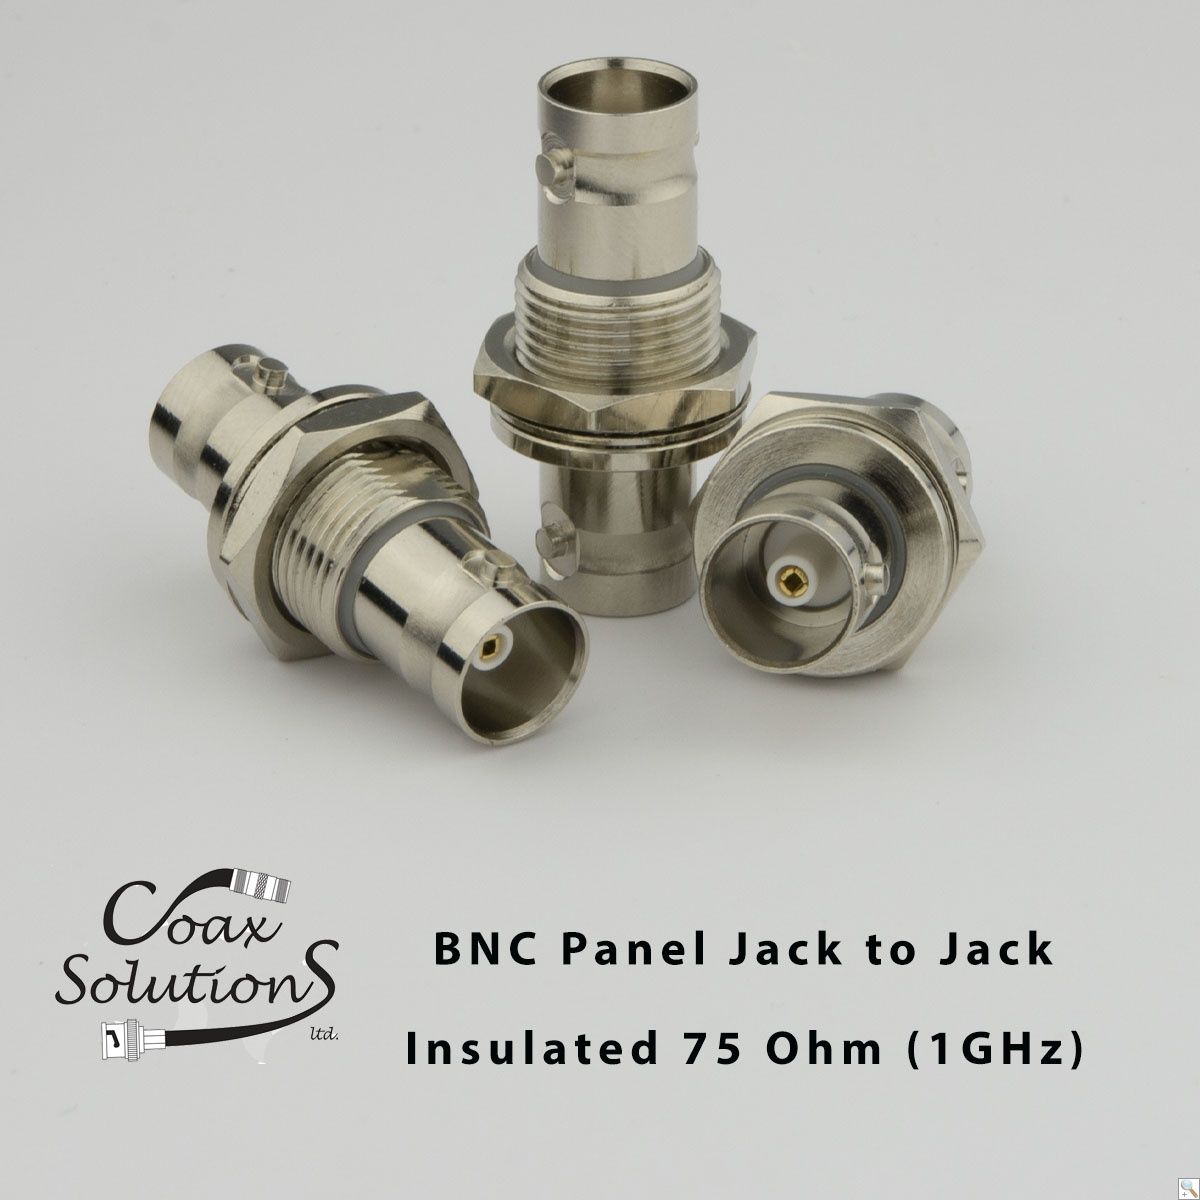 BNC Jack to Jack Adapter - 75 Ohm (1GHz) Insulated